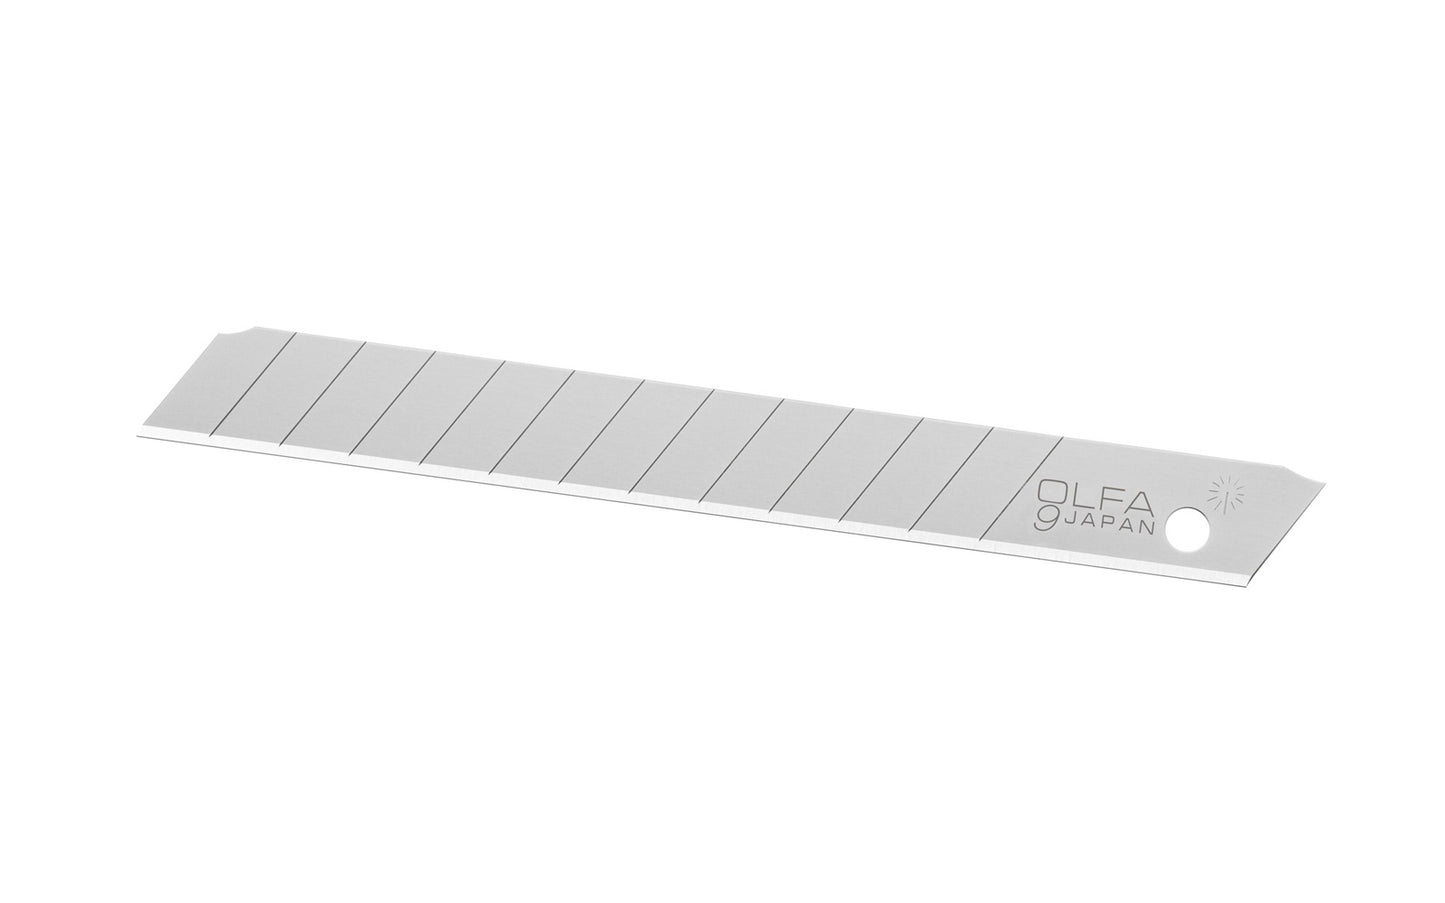 Olfa "AB-10S" 9 mm Replacement Stainless Blades - 10 Pack are manufactured from premium stainless-steel that are expertly honed for the perfect sharp edge. This combination creates a snap blade that can work in damp environments without rust or corrosion. Olfa Model AB-10S. 10 Blades. 091511500349. Made in Japan